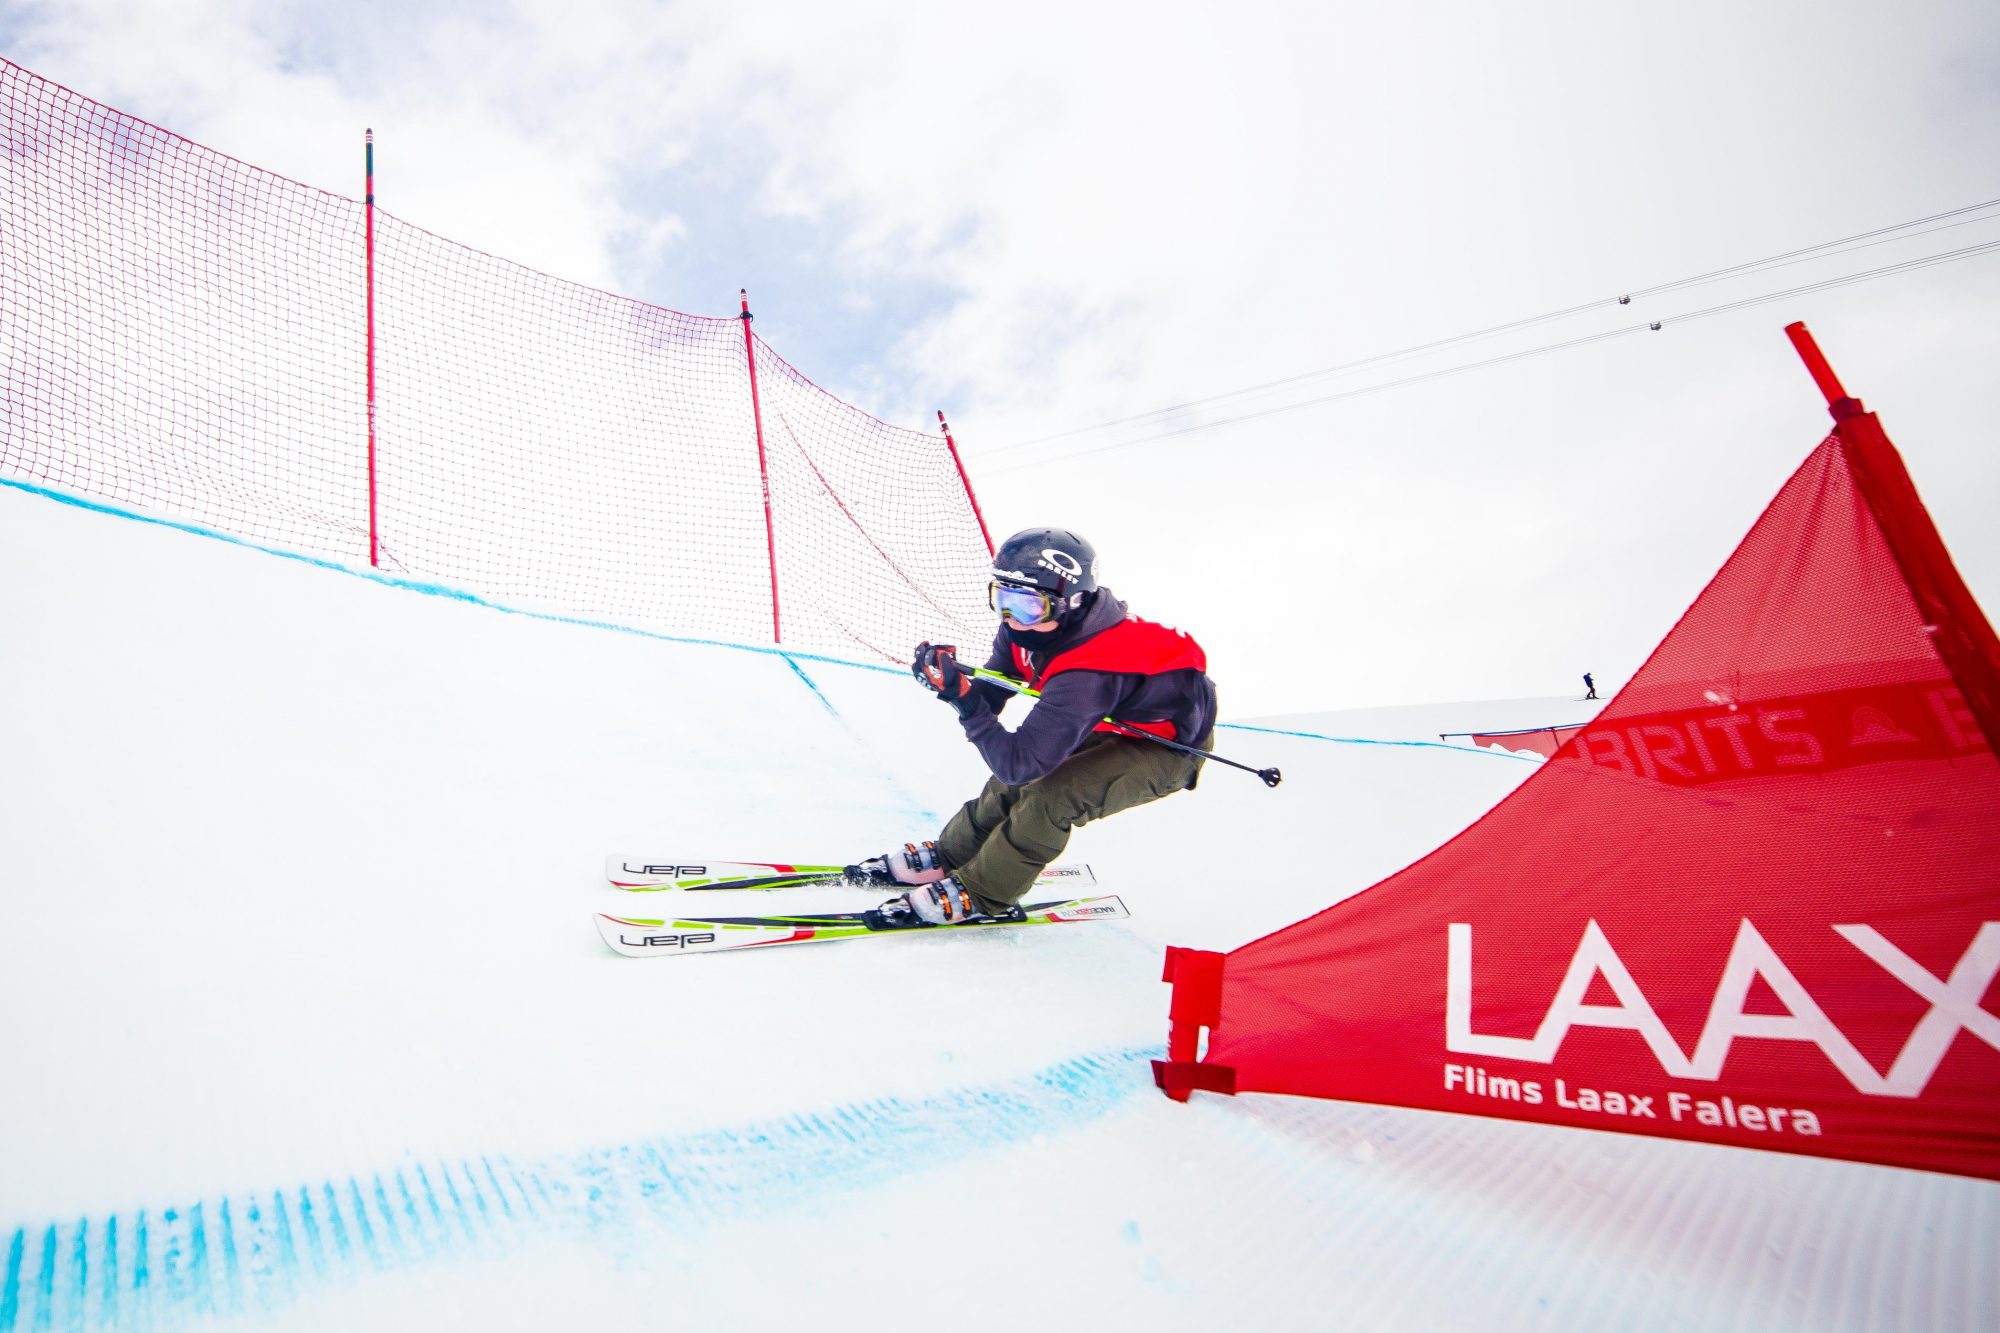 THE BRITS DAY 2 &#8211; Ski Cross and Snowboard Big Air Bring Out Some Awesome Performances